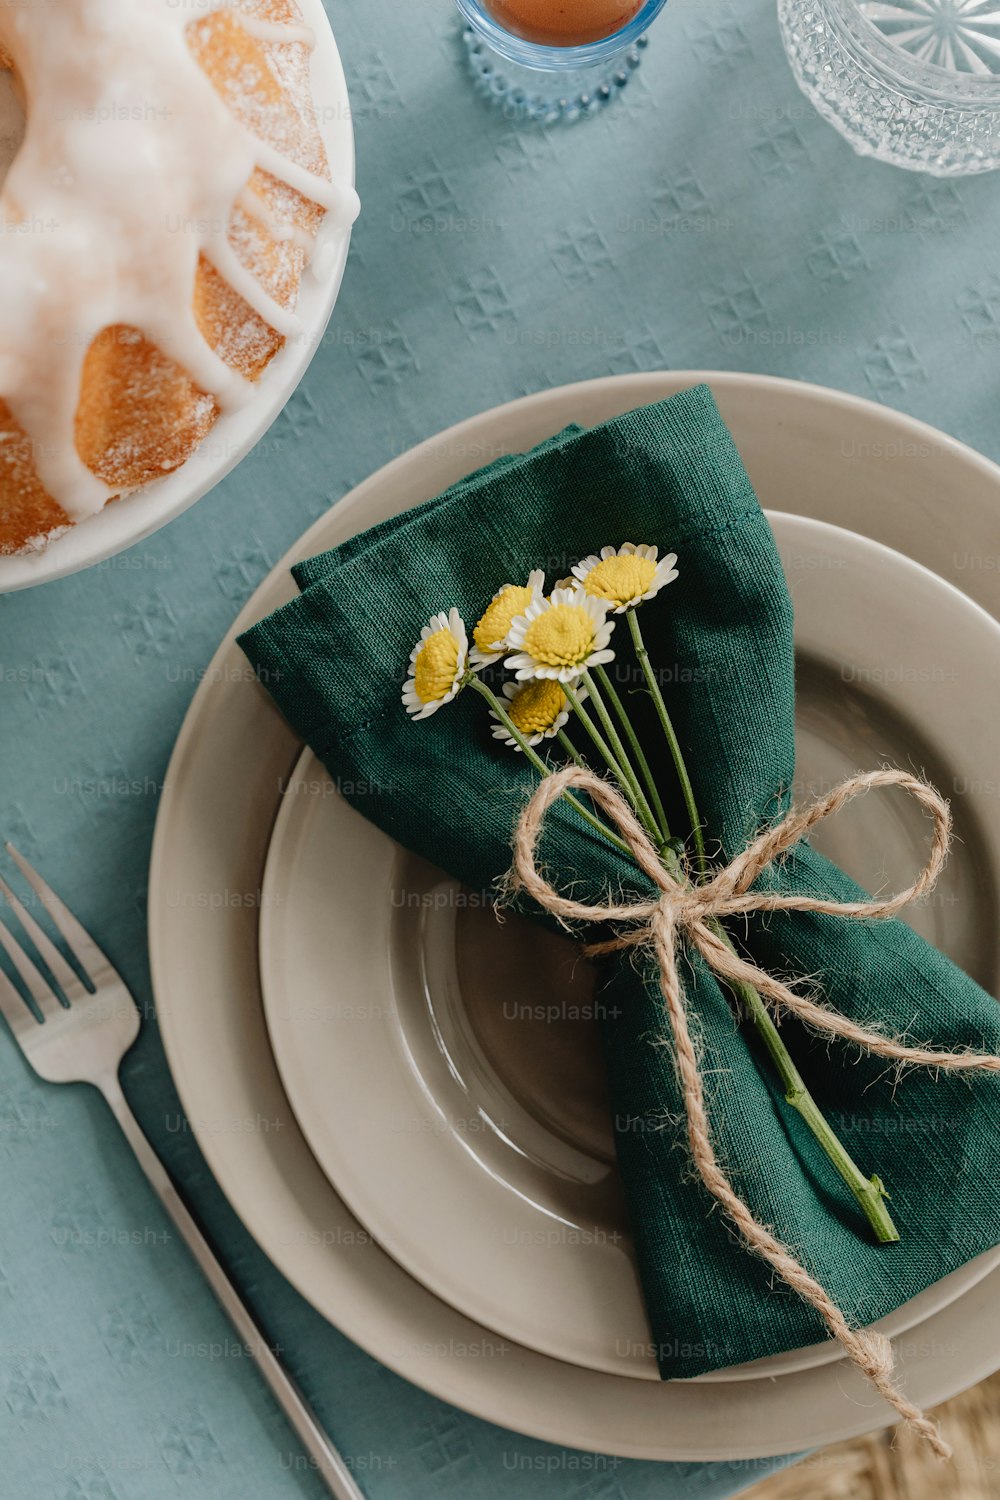 a plate with a napkin and some flowers on it